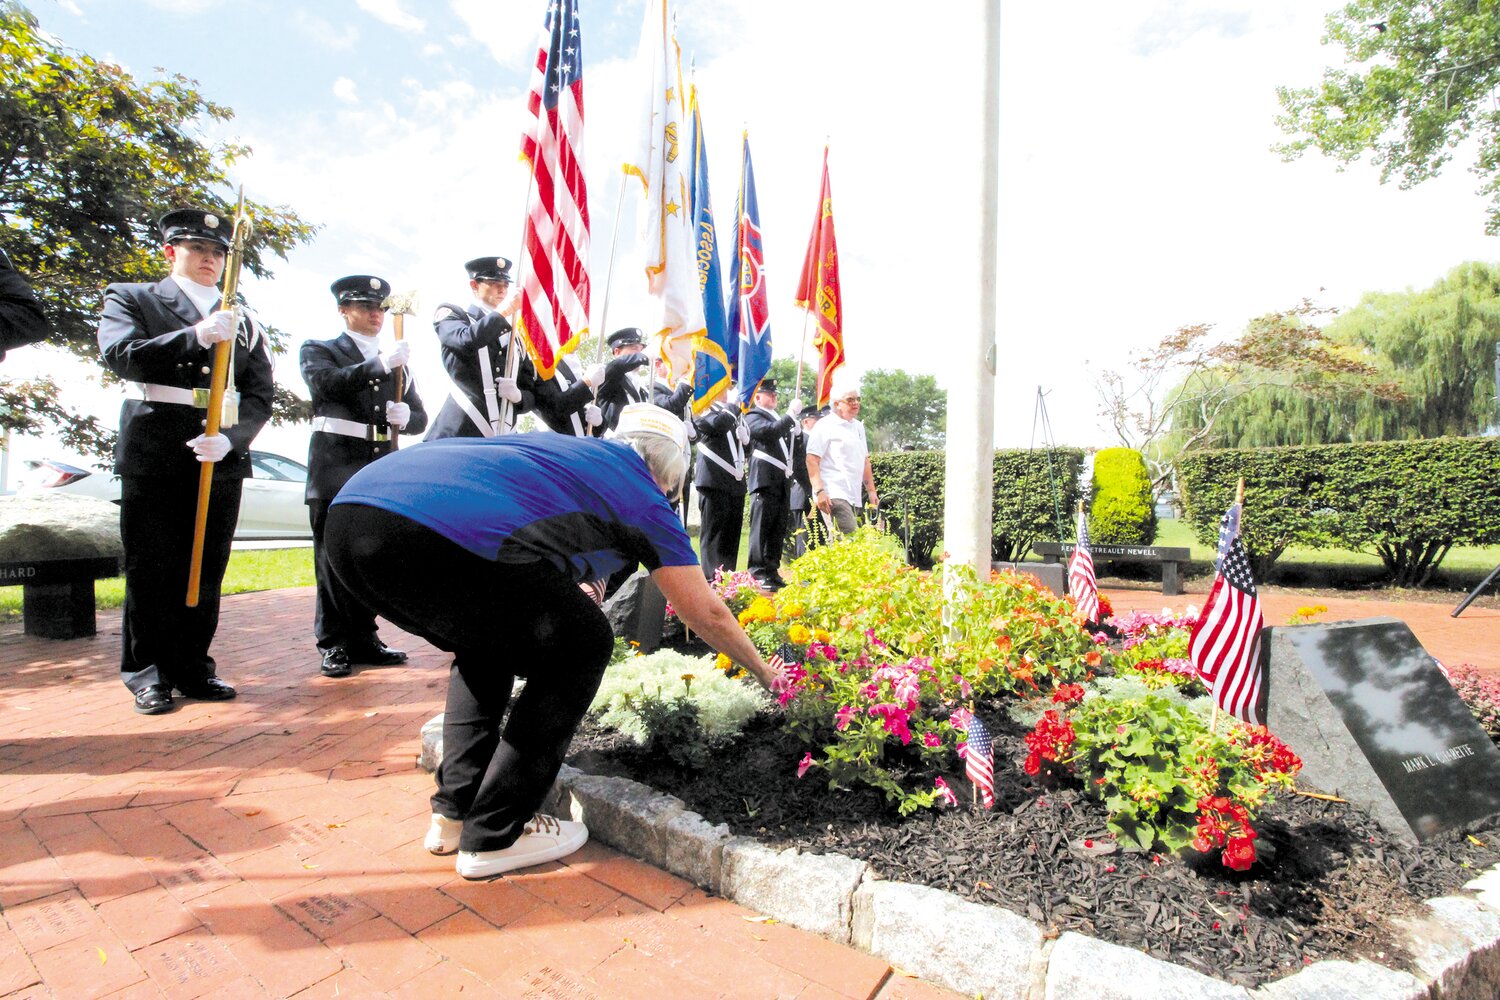 FOR THE FALLEN: As the names of eight Rhode Islanders killed in the September 11 attacks were read aloud, an attendee places flowers to honor those lost as an honor guard stands by.